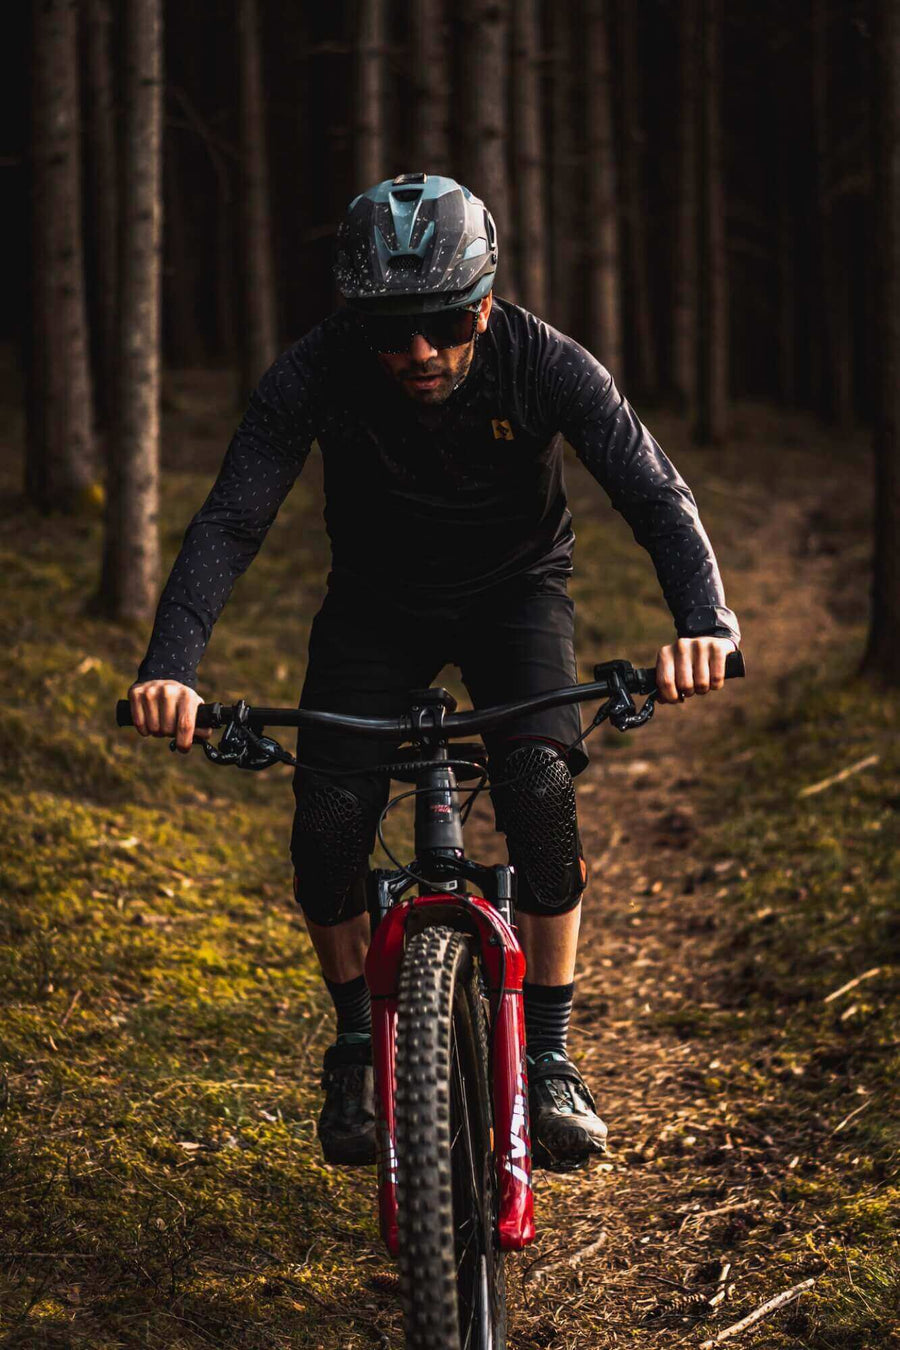 Men‘s - SWET LS Een Radtrikots % OUTLET ARCHIV192 2nd Edt. Anthracite EVO - Comfortable - Training Cut Frühjahr / Sommer Herbst / Winter L M Men Mountainbike206 Peacoat Radtrikots193 Recycled Polyester Recycled Polyester188 S spo-default spo-disabled spo-notify-me-disabled Winter-Guide XL XXL